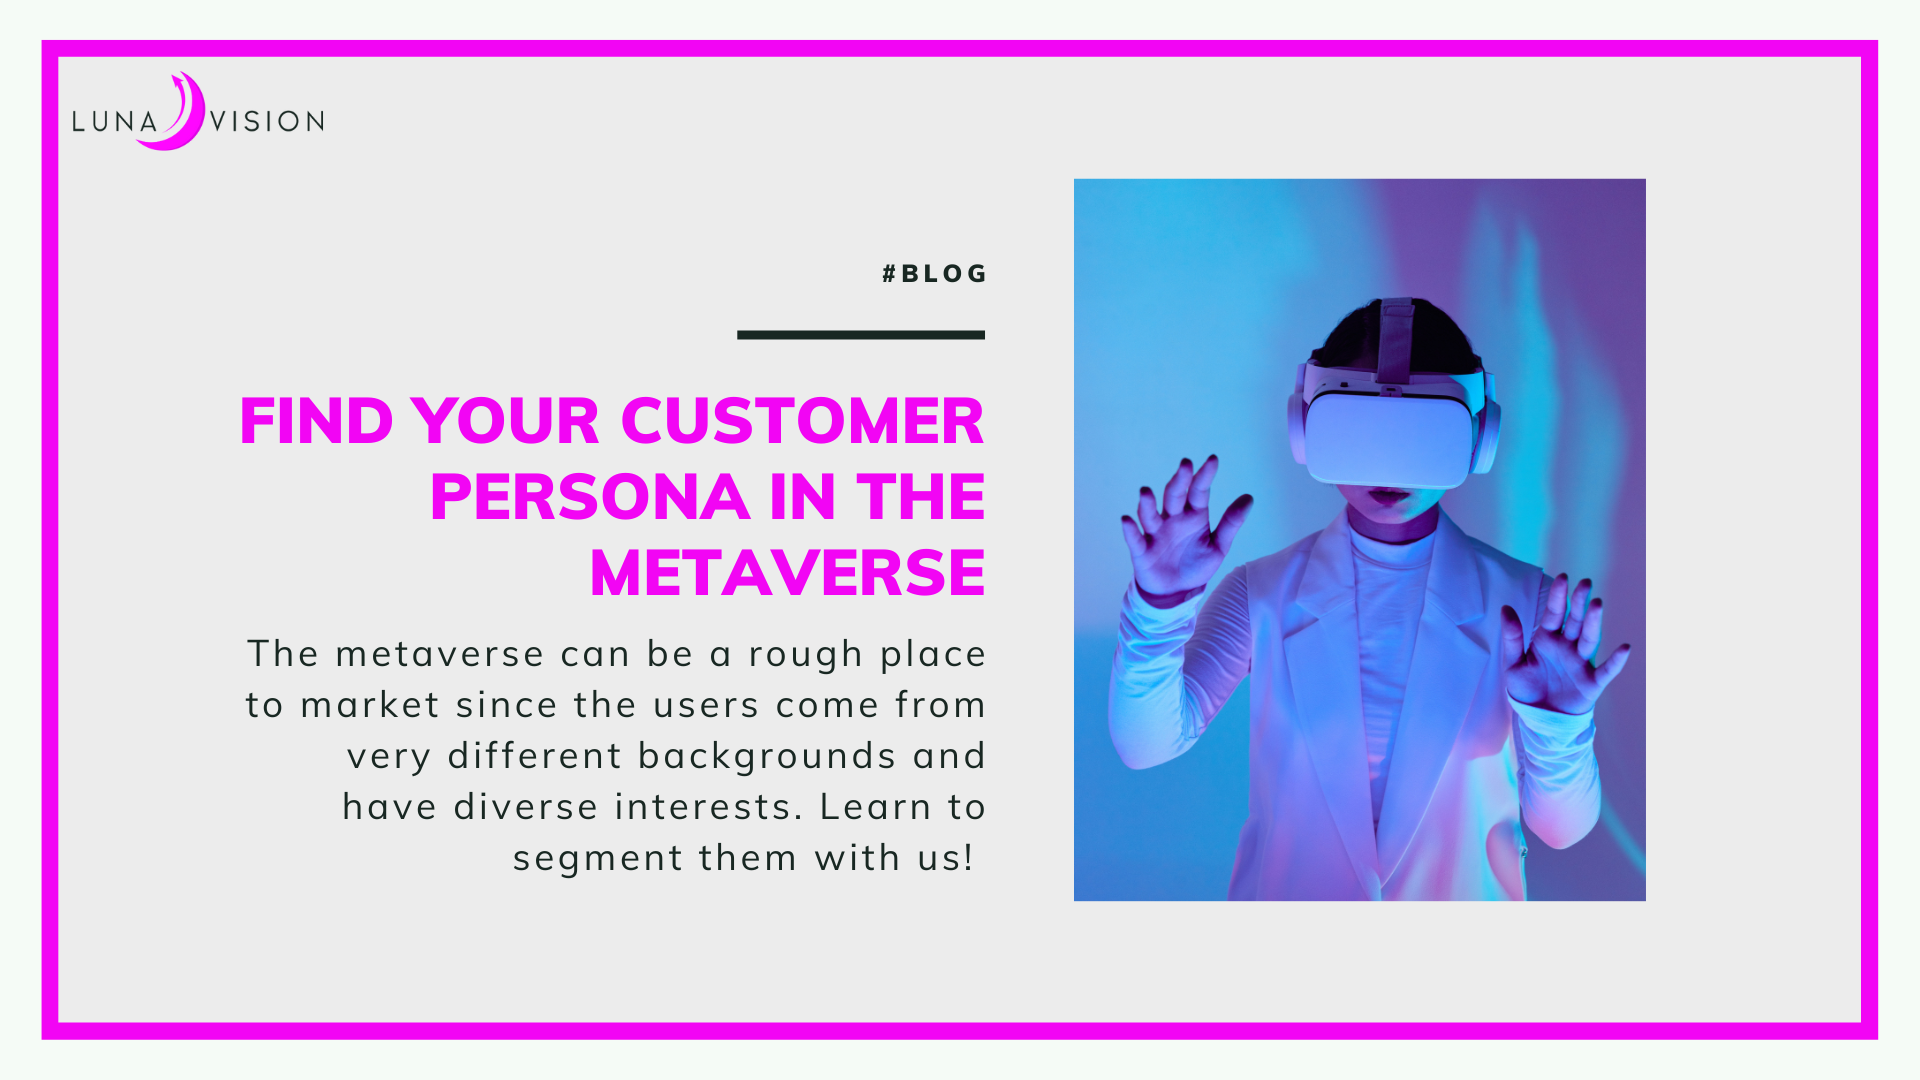 Find your customer persona in the metaverse